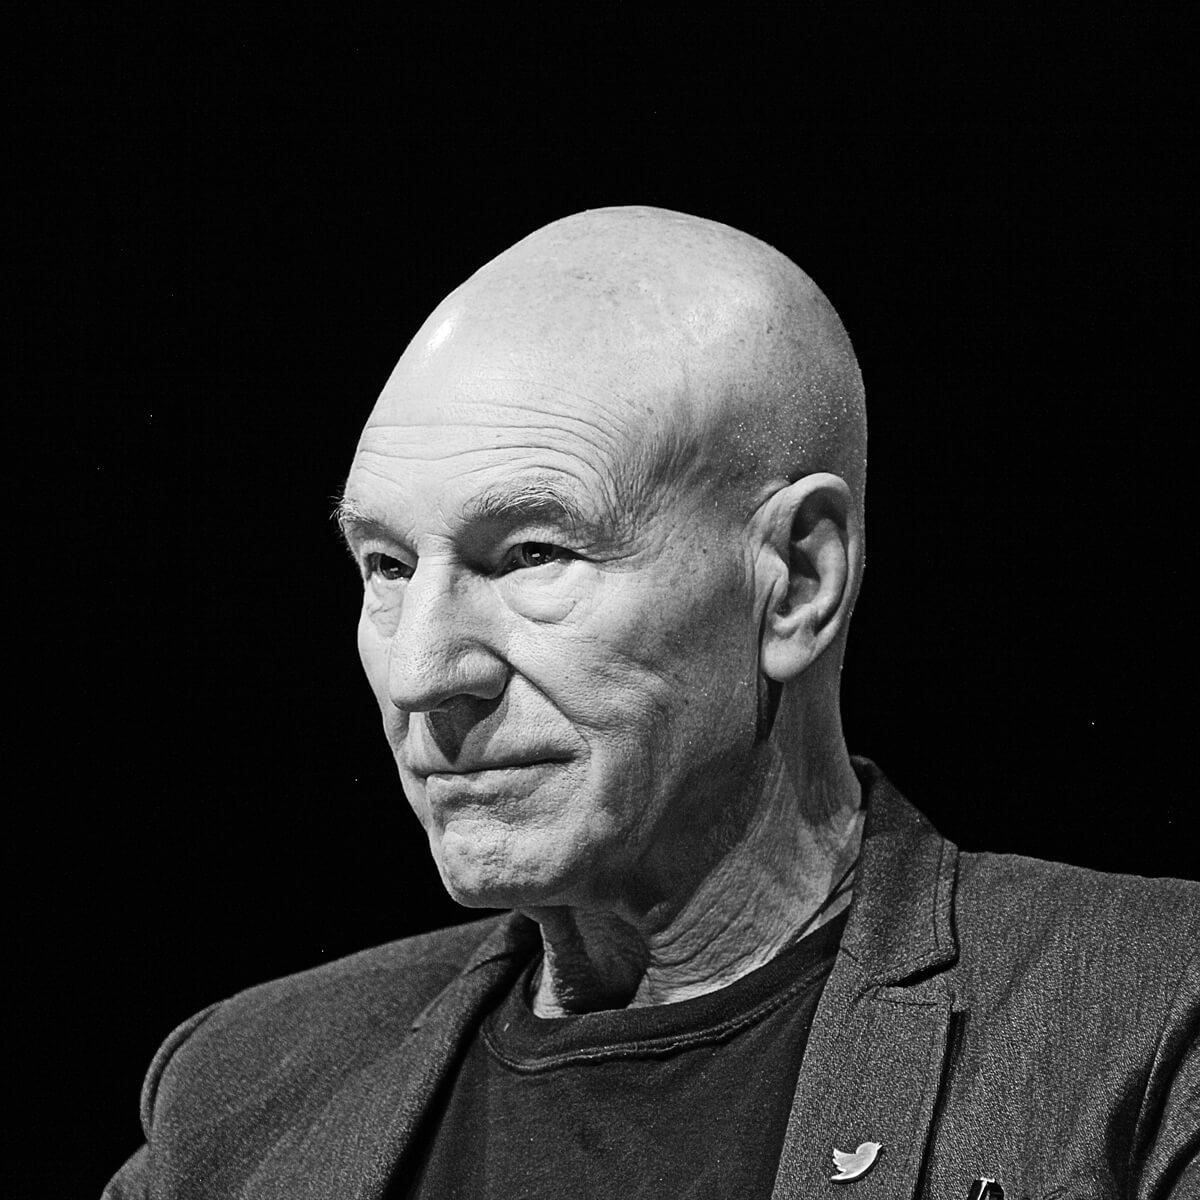 Photograph of English actor Sir Patrick Stewart by Julian Hanford at Cannes Lions 2017